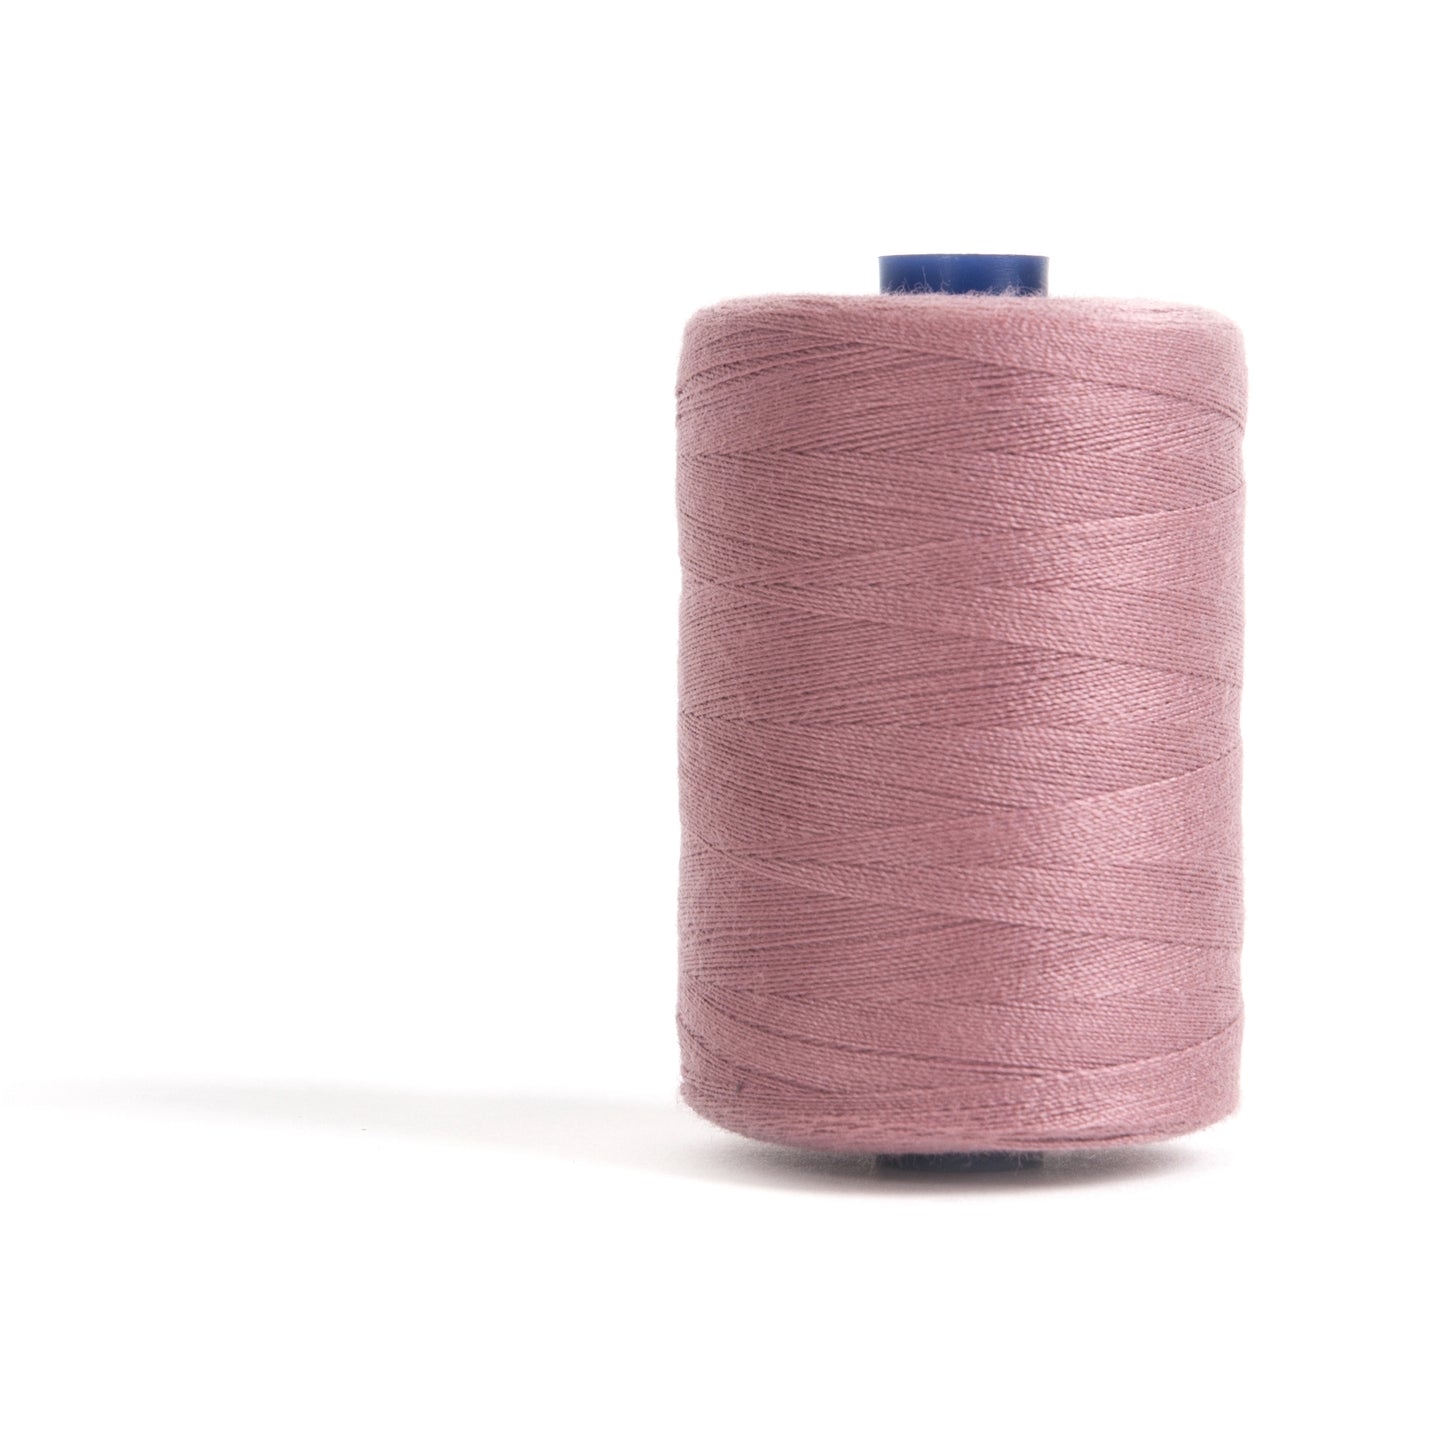 Sewing and Overlocking Thread: 1,000m: Rose